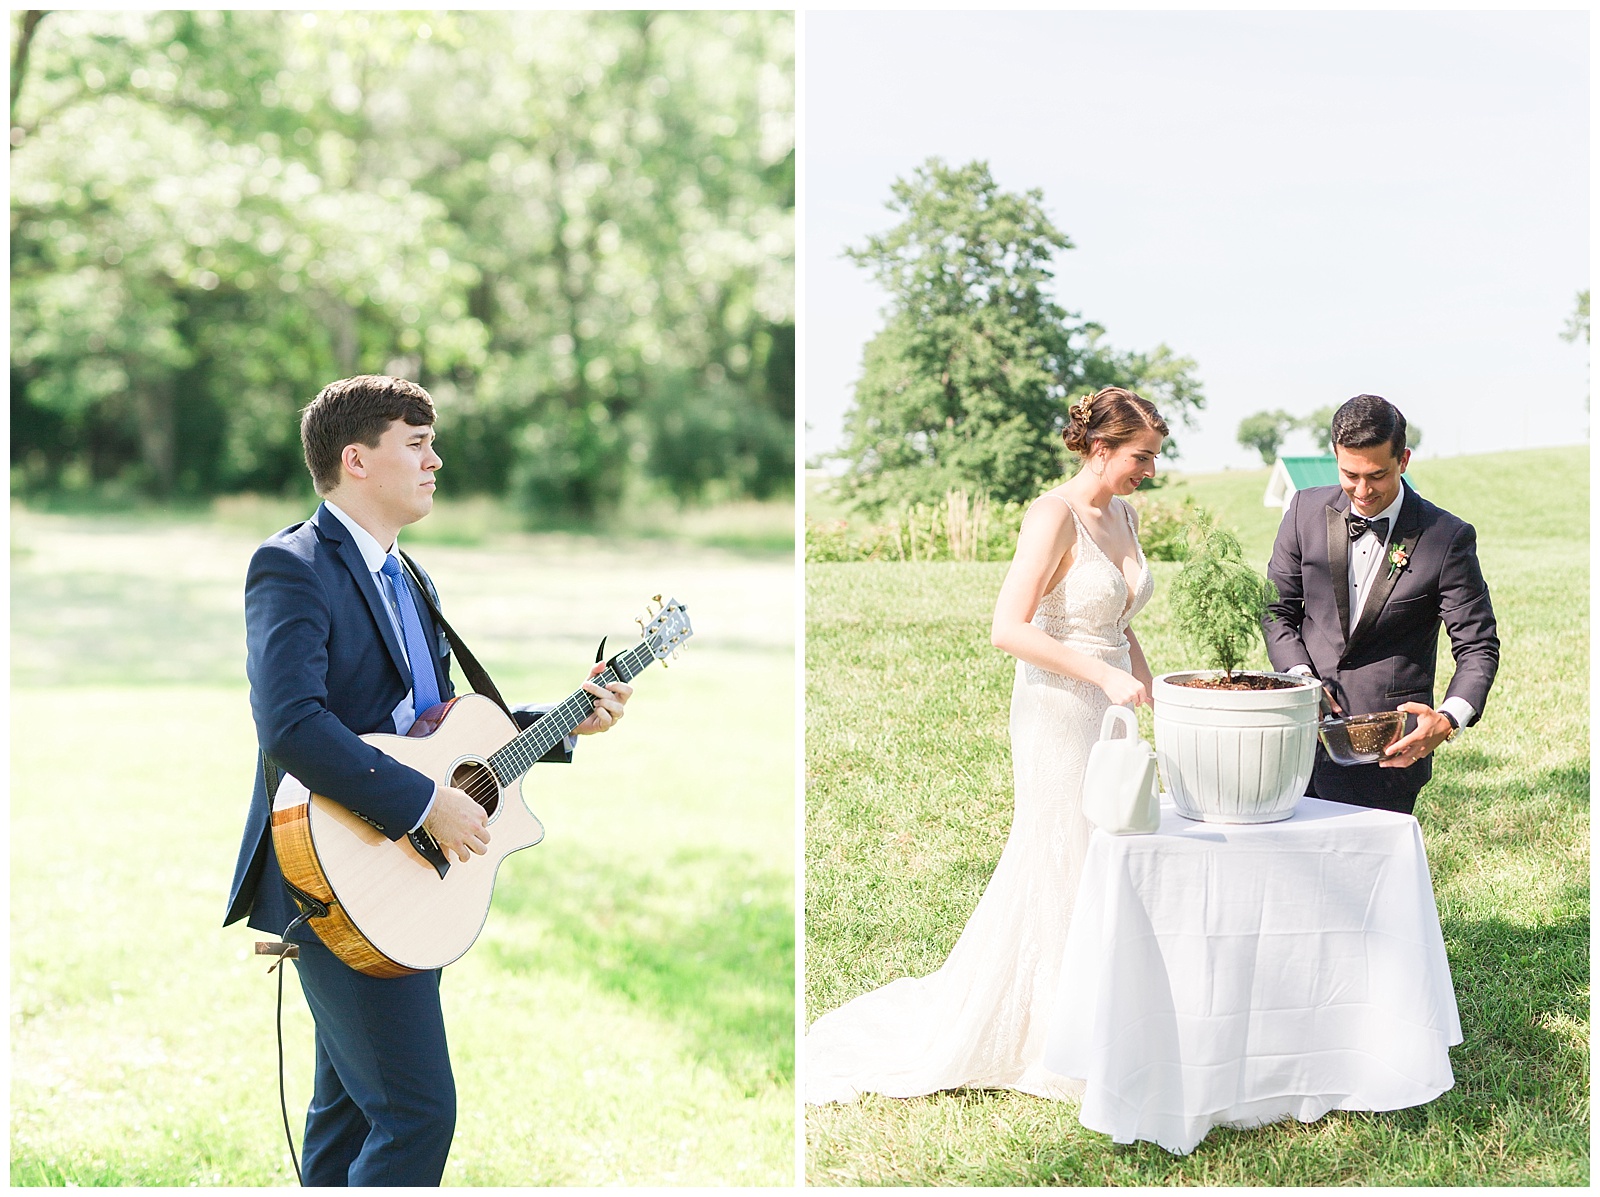 Ceremony inspiration with live music and planting a tree to have in their home